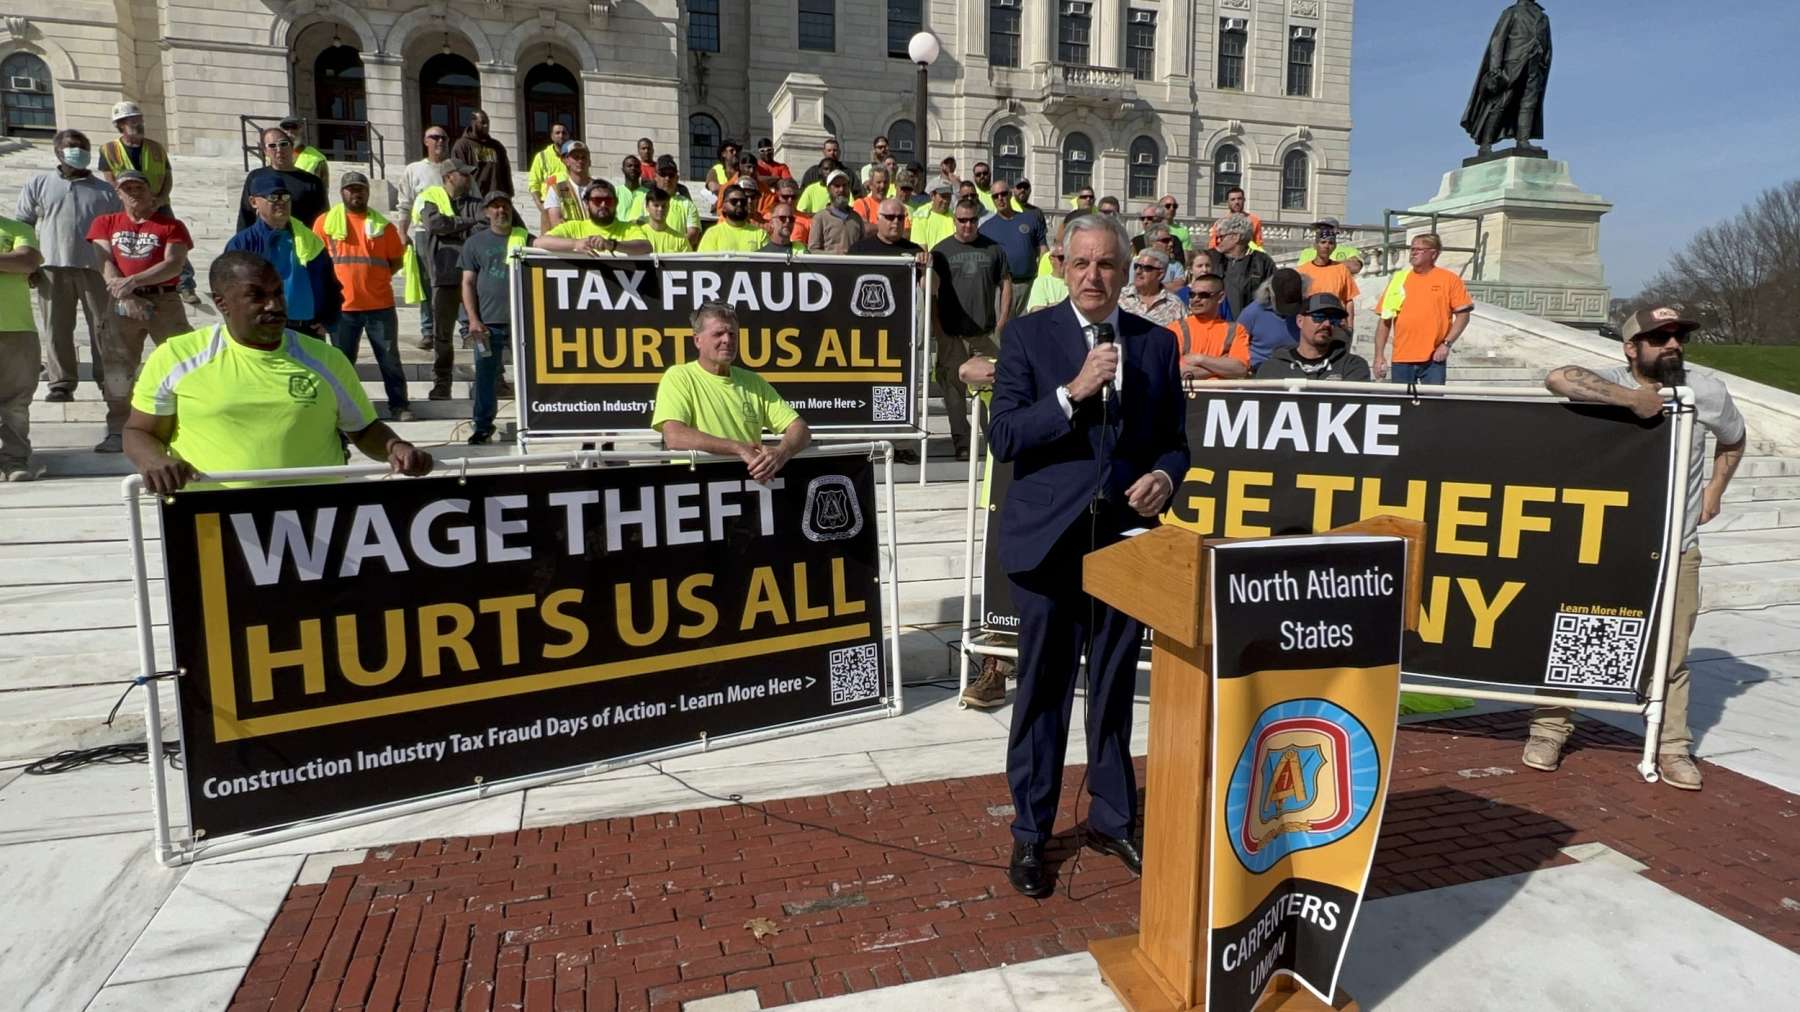 Rhode Island News: Is this the year the RI General Assembly does something about wage theft?